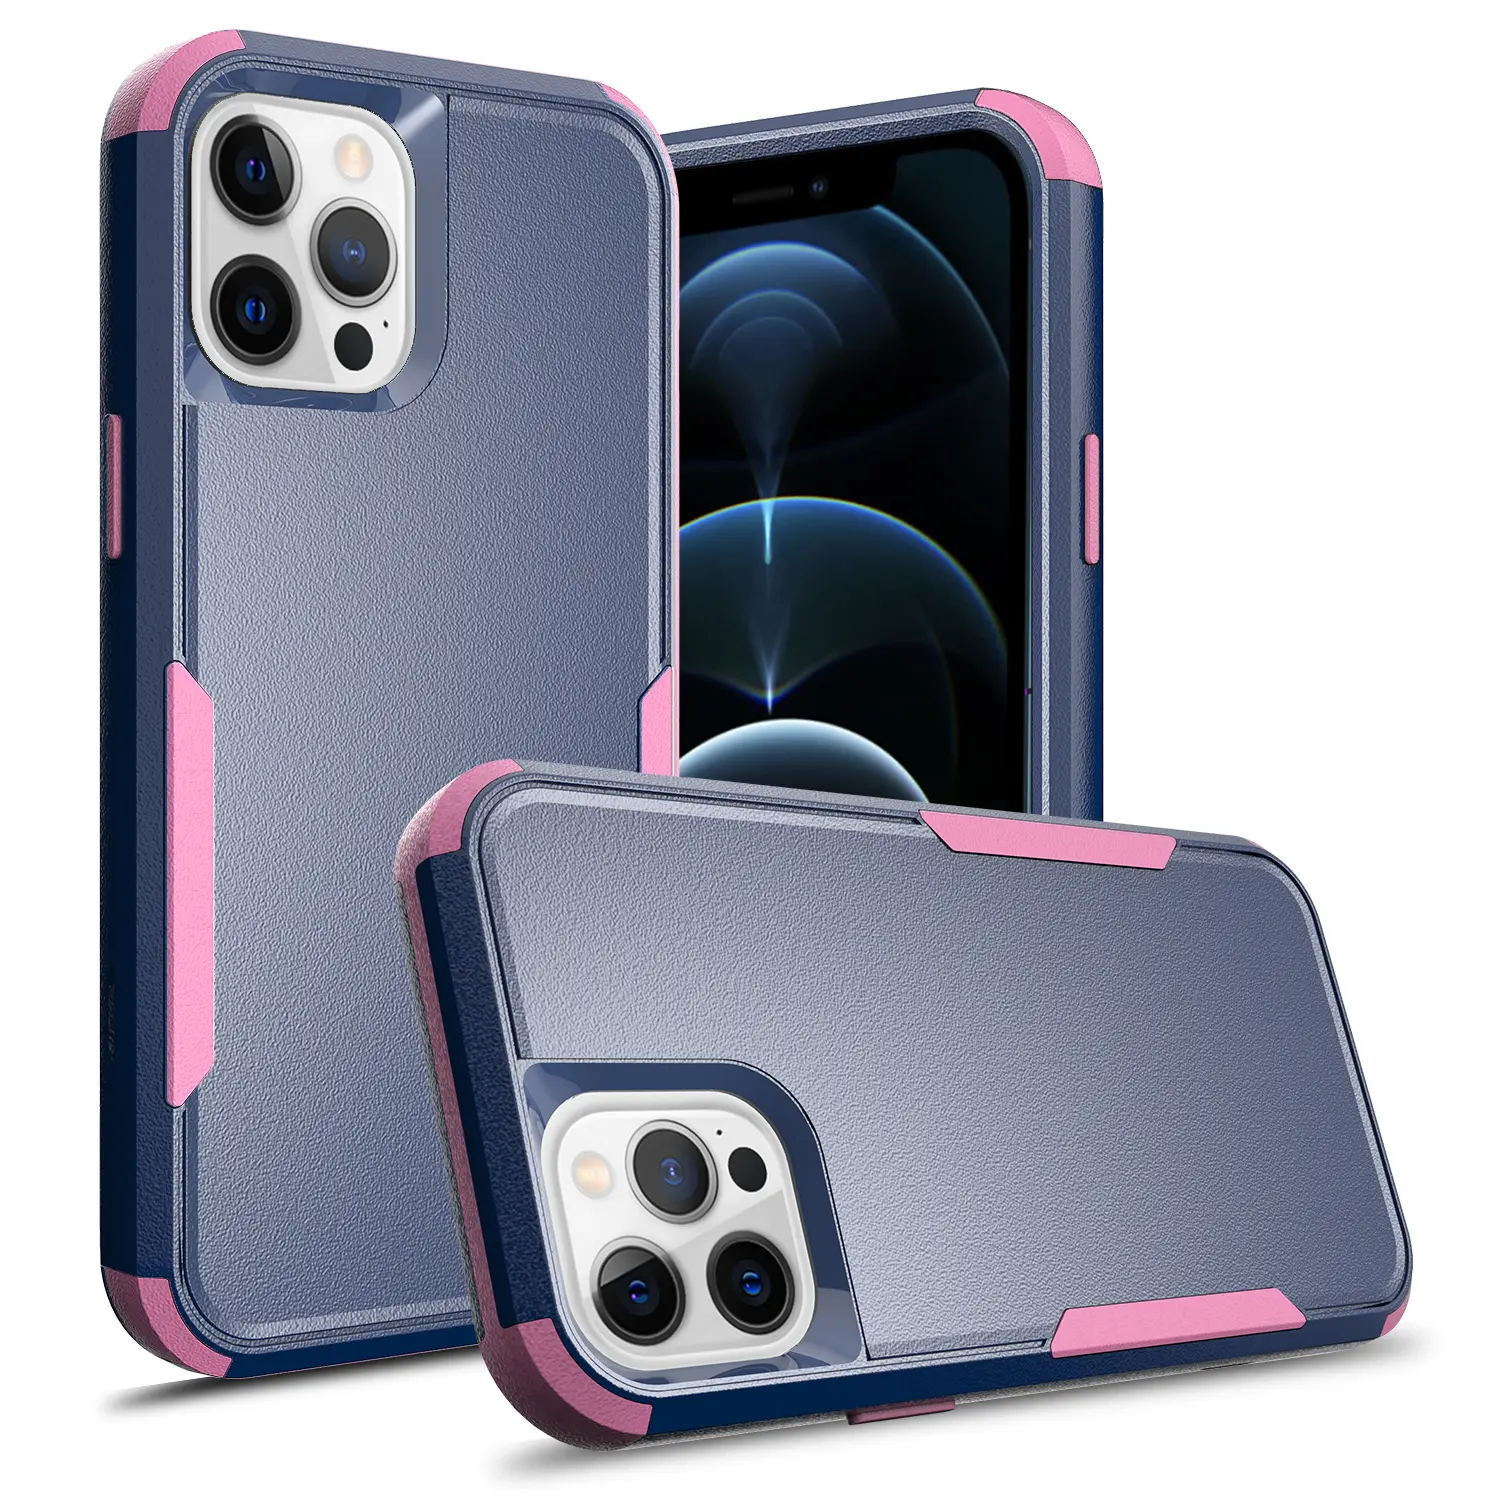 New Deign Dual Layer 360 Degree Full Body Armor Bumper Case for iPhone 12 Pro Max, For iphone12 shockproof case